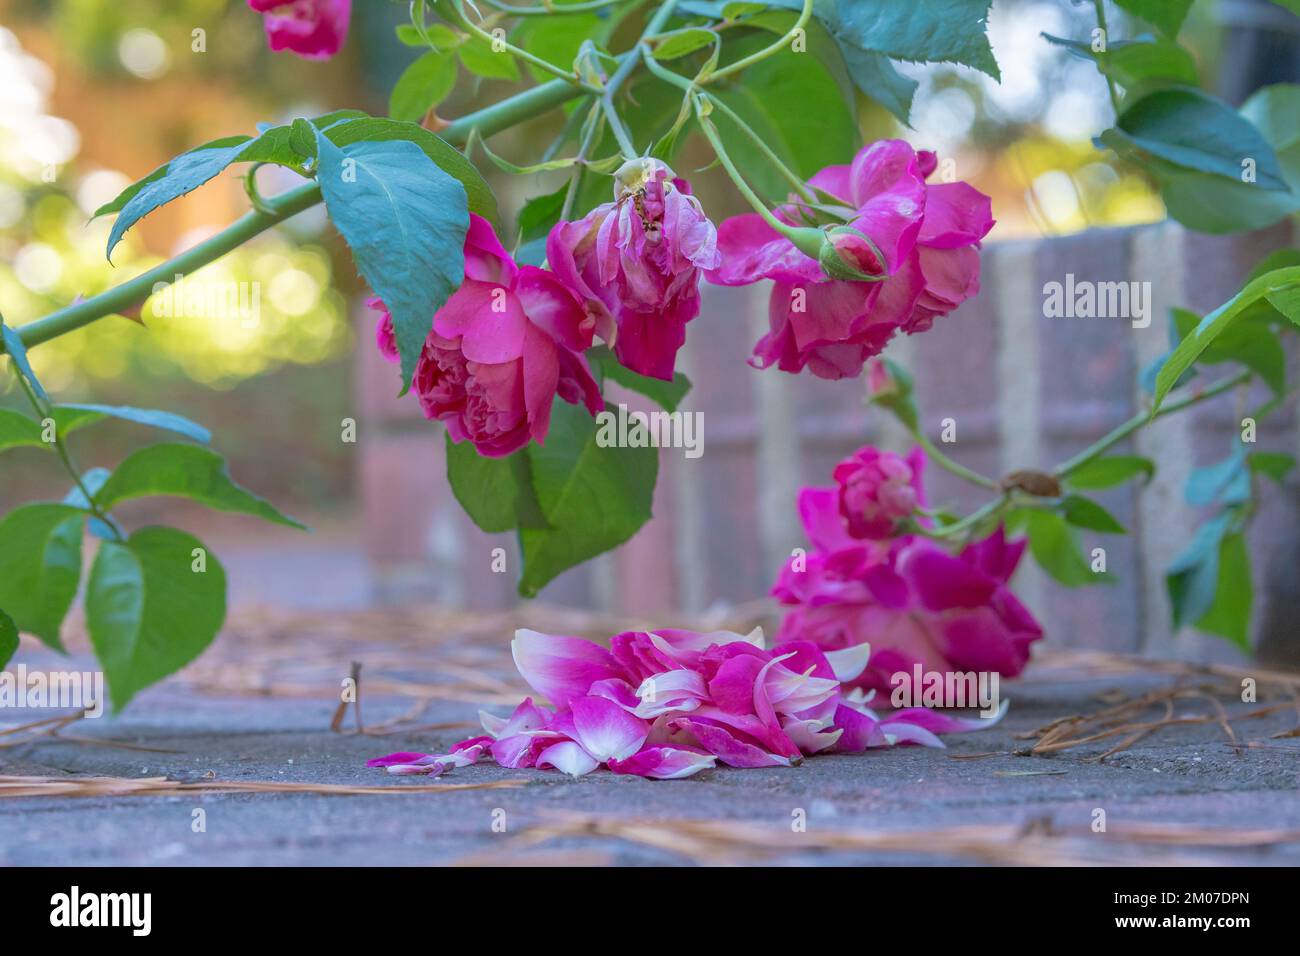 A stem covered in vibrant pink roses has fallen over and flower petals have scattered on the ground. Stock Photo